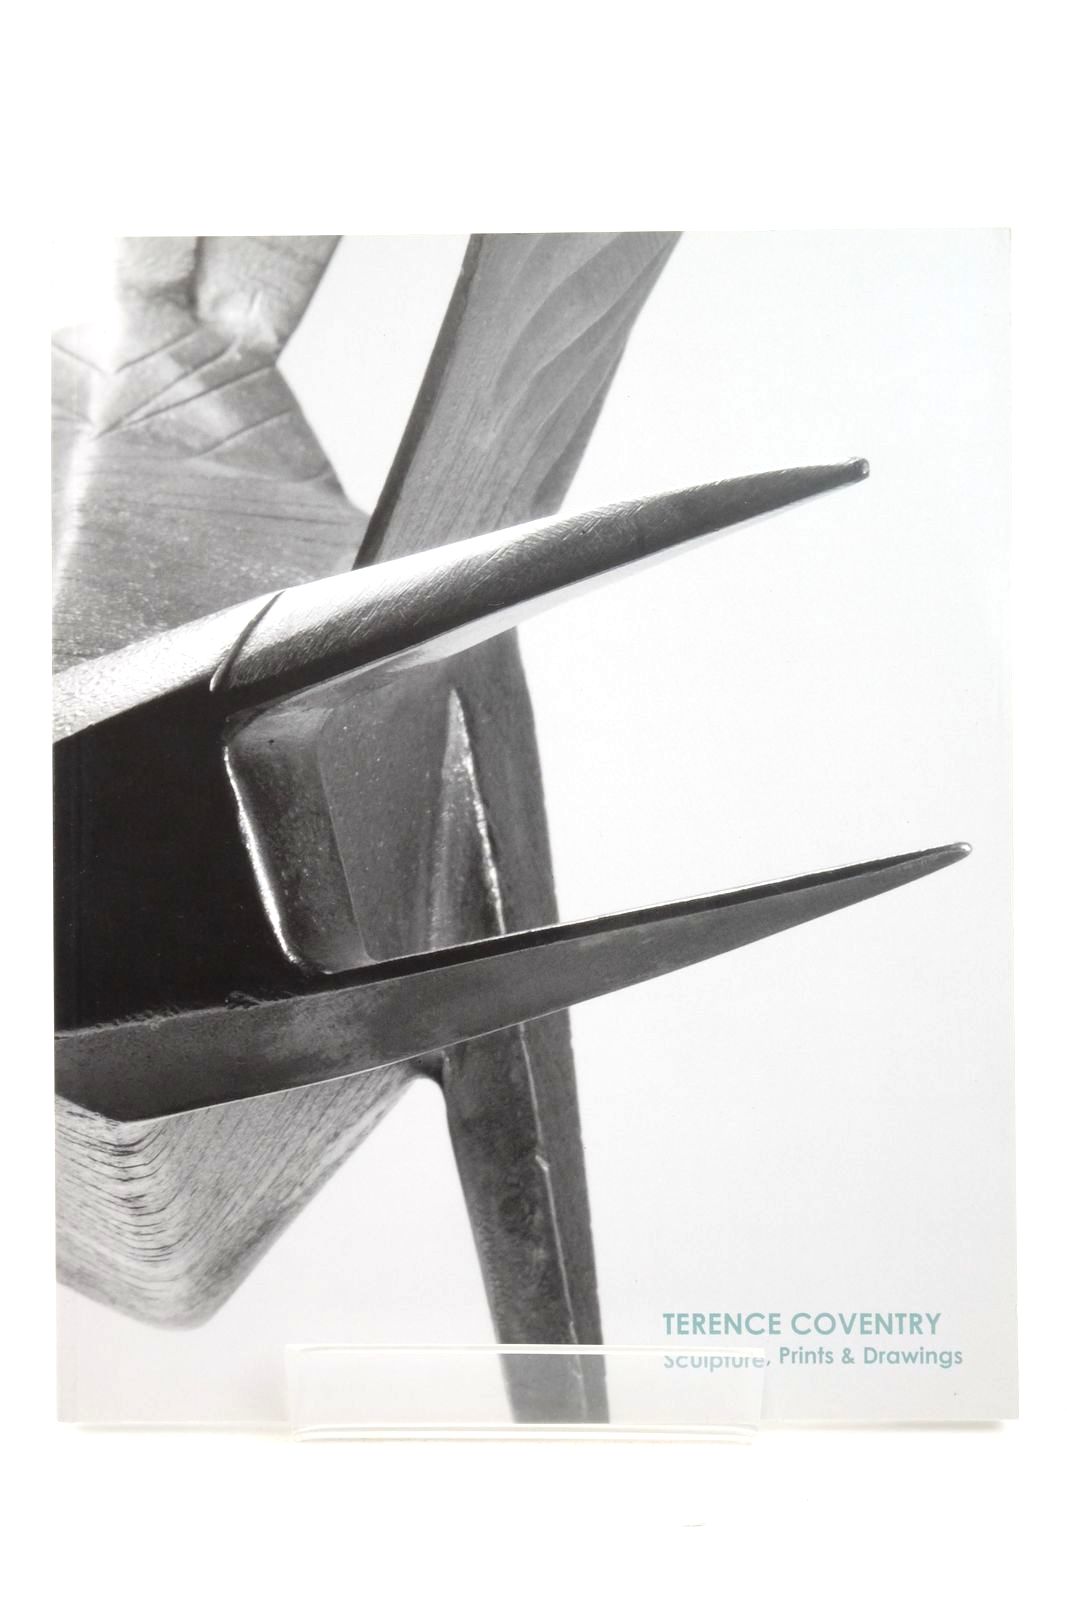 Photo of TERENCE COVENTRY: SCULPTURE, PRINTS & DRAWINGS written by Kingdon, Rungwe illustrated by Coventry, Terence published by Pangolin London (STOCK CODE: 2136708)  for sale by Stella & Rose's Books